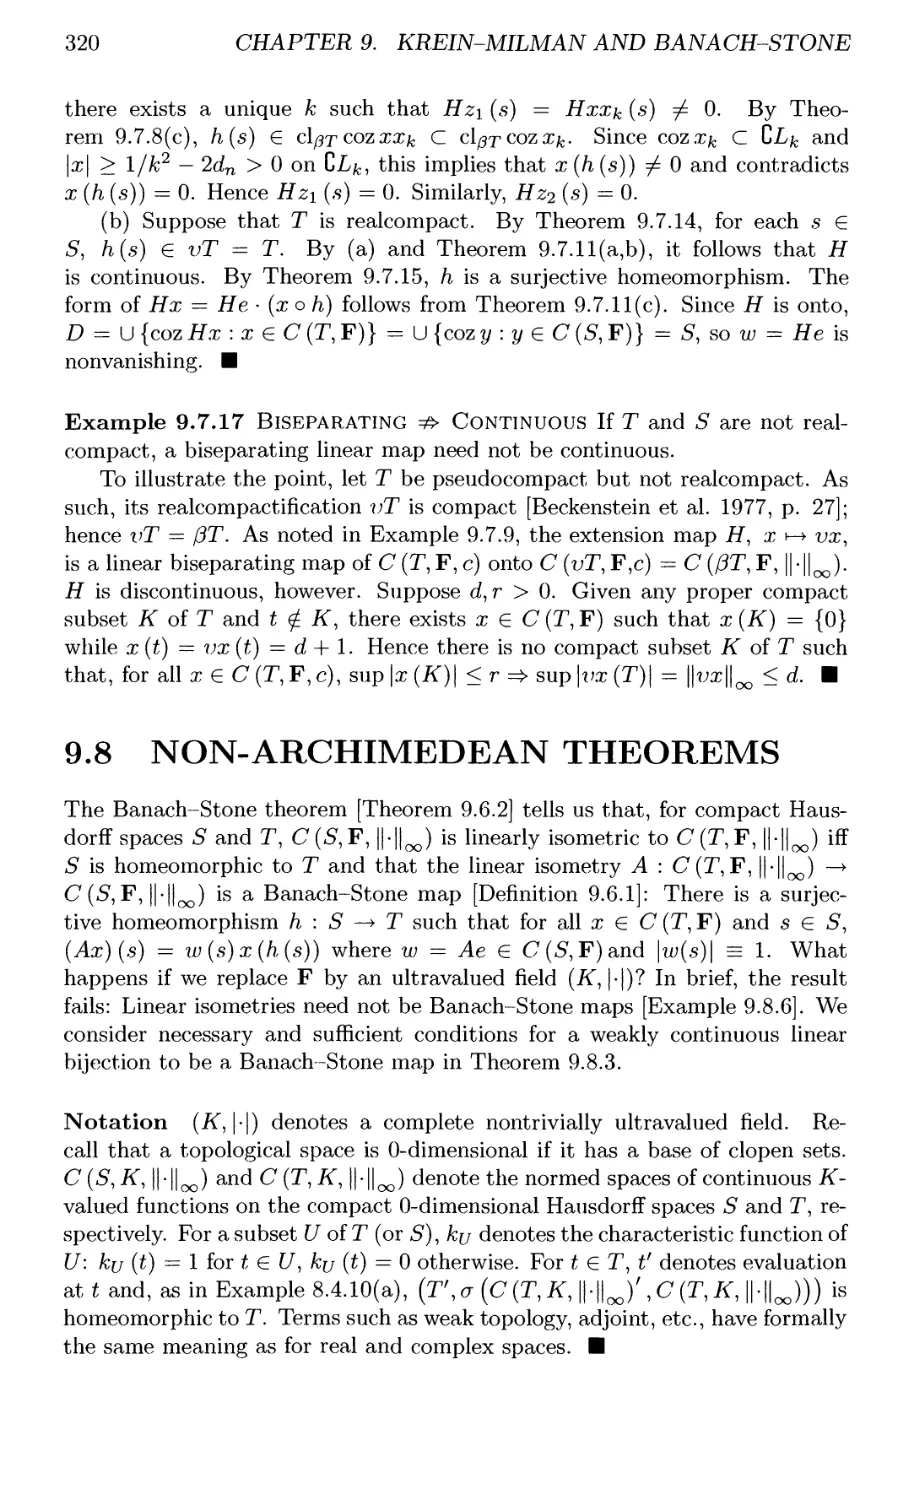 9.8 NON-ARCHIMEDEAN THEOREMS